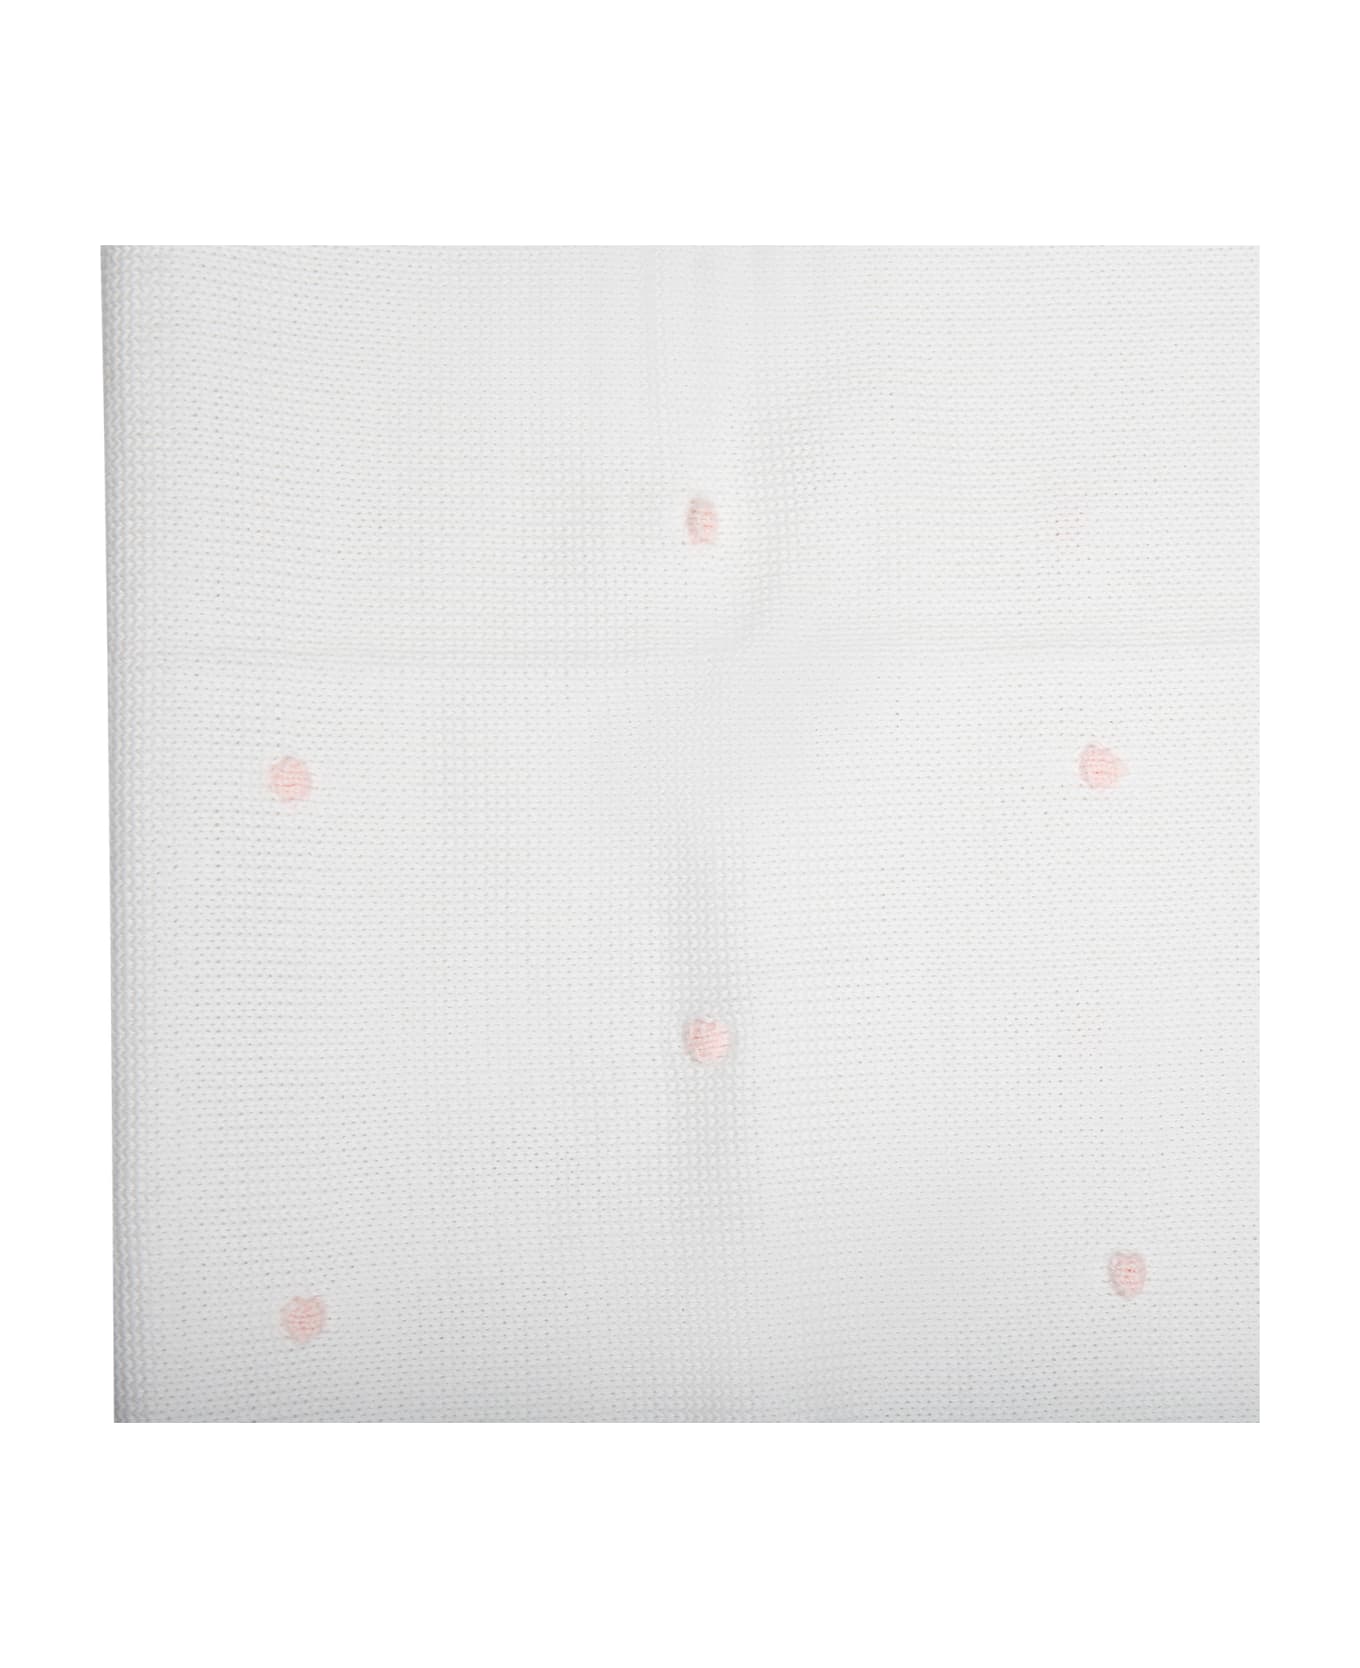 Little Bear White Baby Blanket For Baby Girl With Pink Polka Dots - White